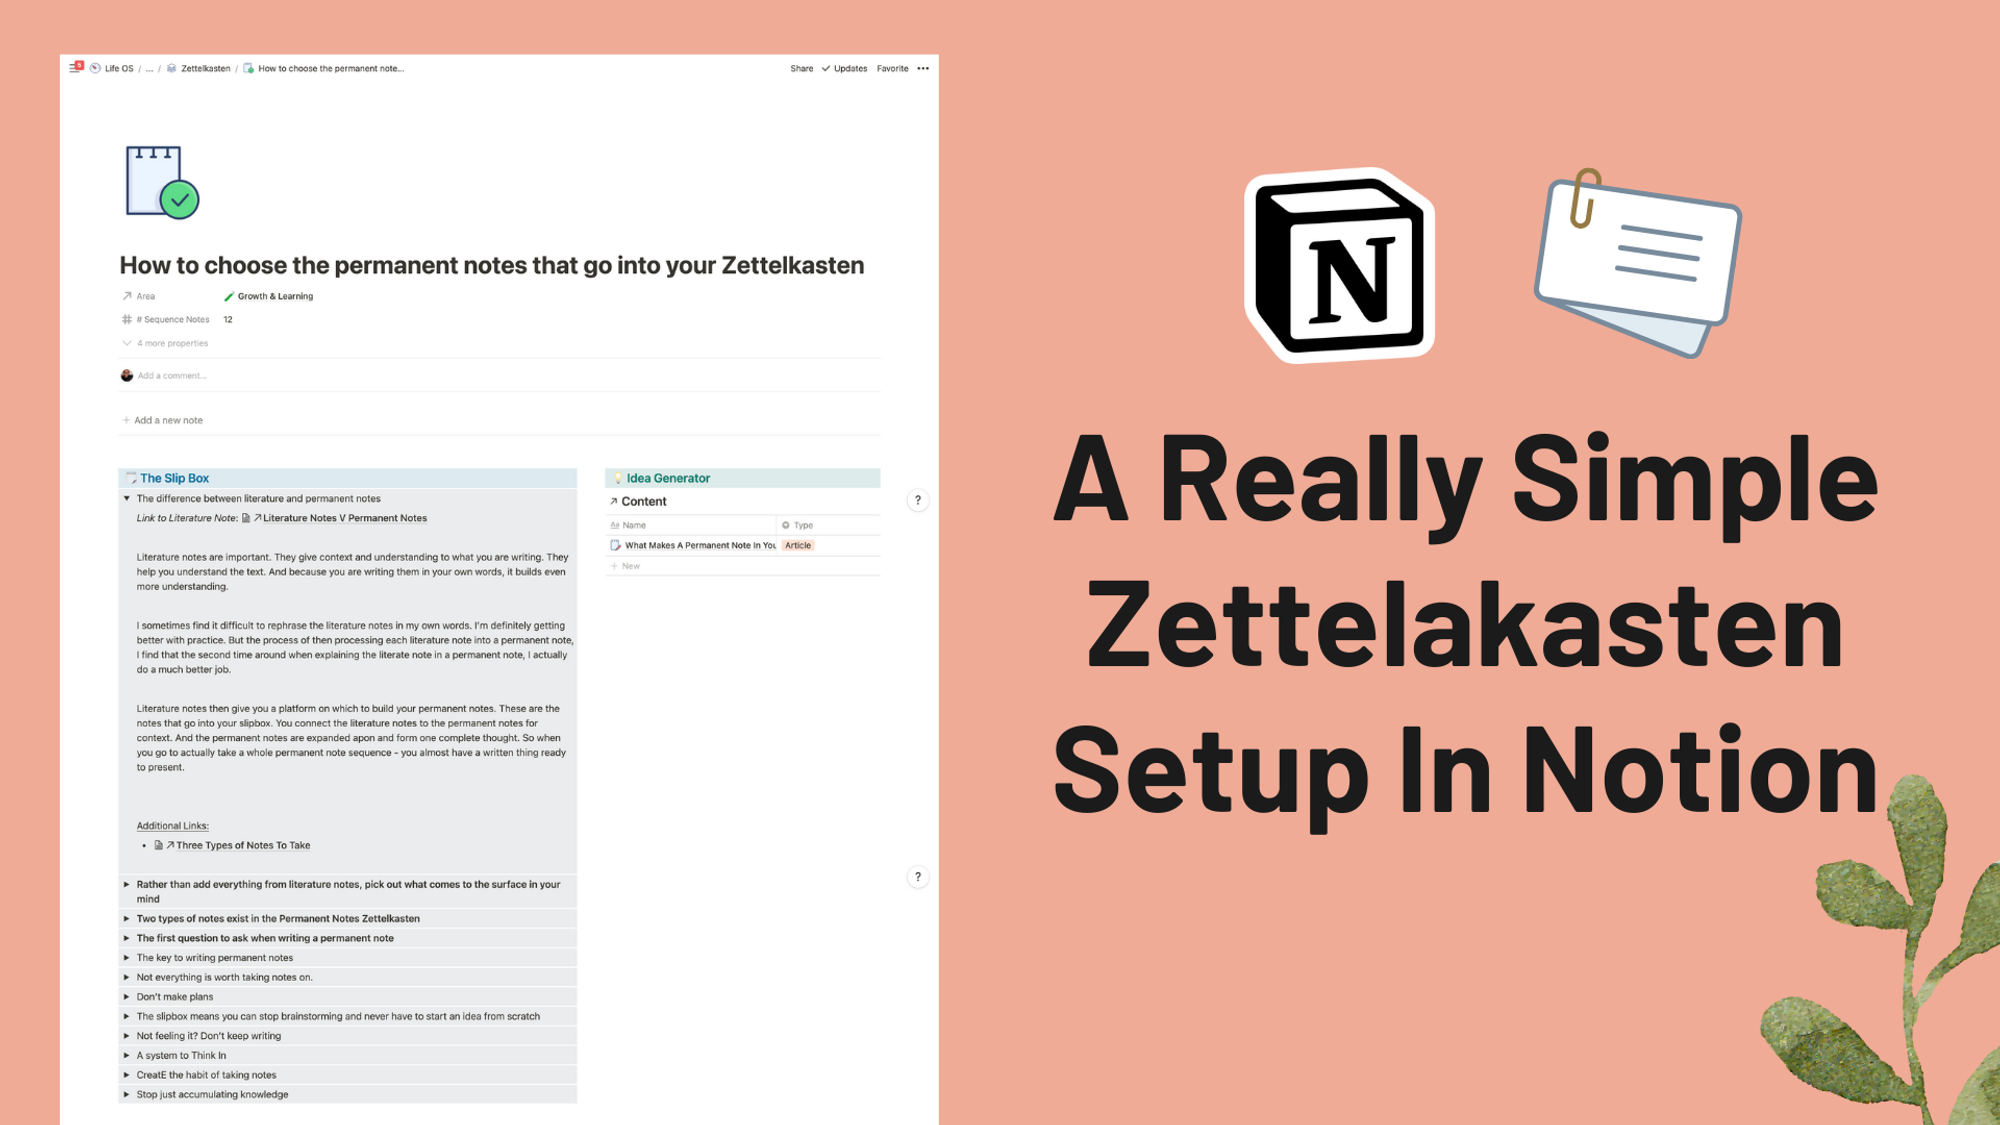 A Really Simple Notion Zettelkasten Setup To Generate New Content Ideas Easily.